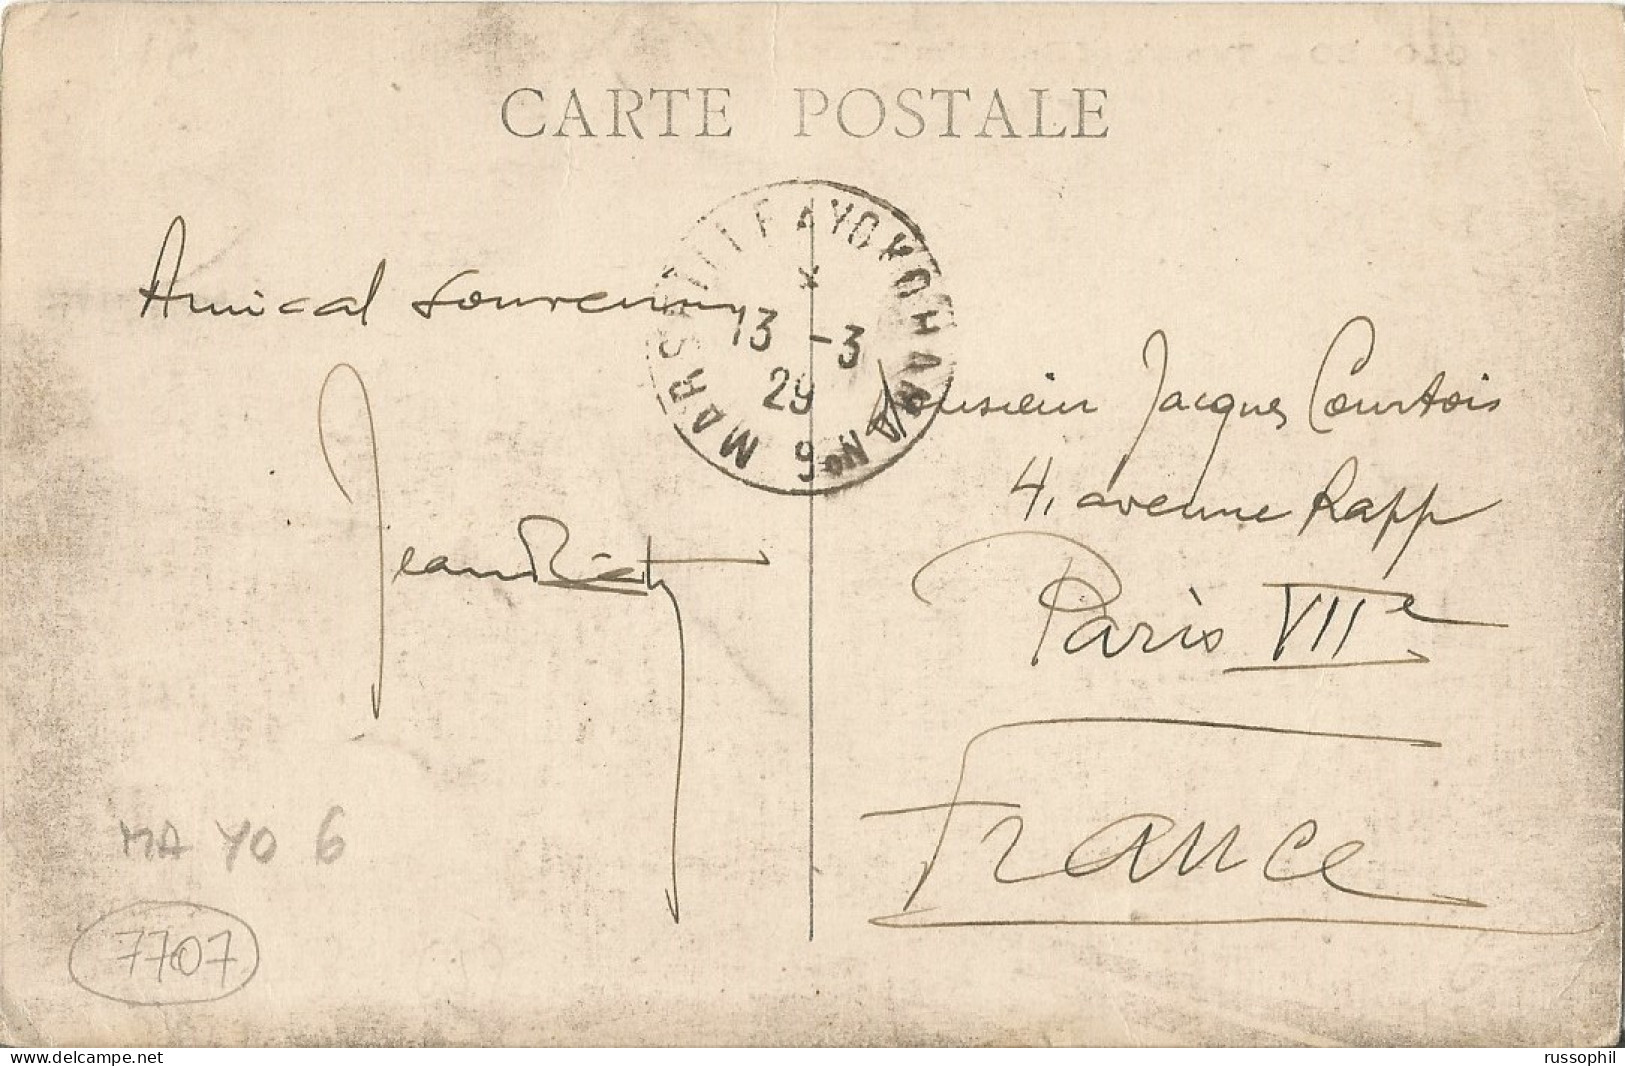 FRANCE - SEA POST - “MARSEILLE TO YOKOHAMA" DEPARTURE CDS ON FRANKED PC (VIEW OF CEYLON / COLOMBO) TO FRANCE - 1929 - Correo Marítimo